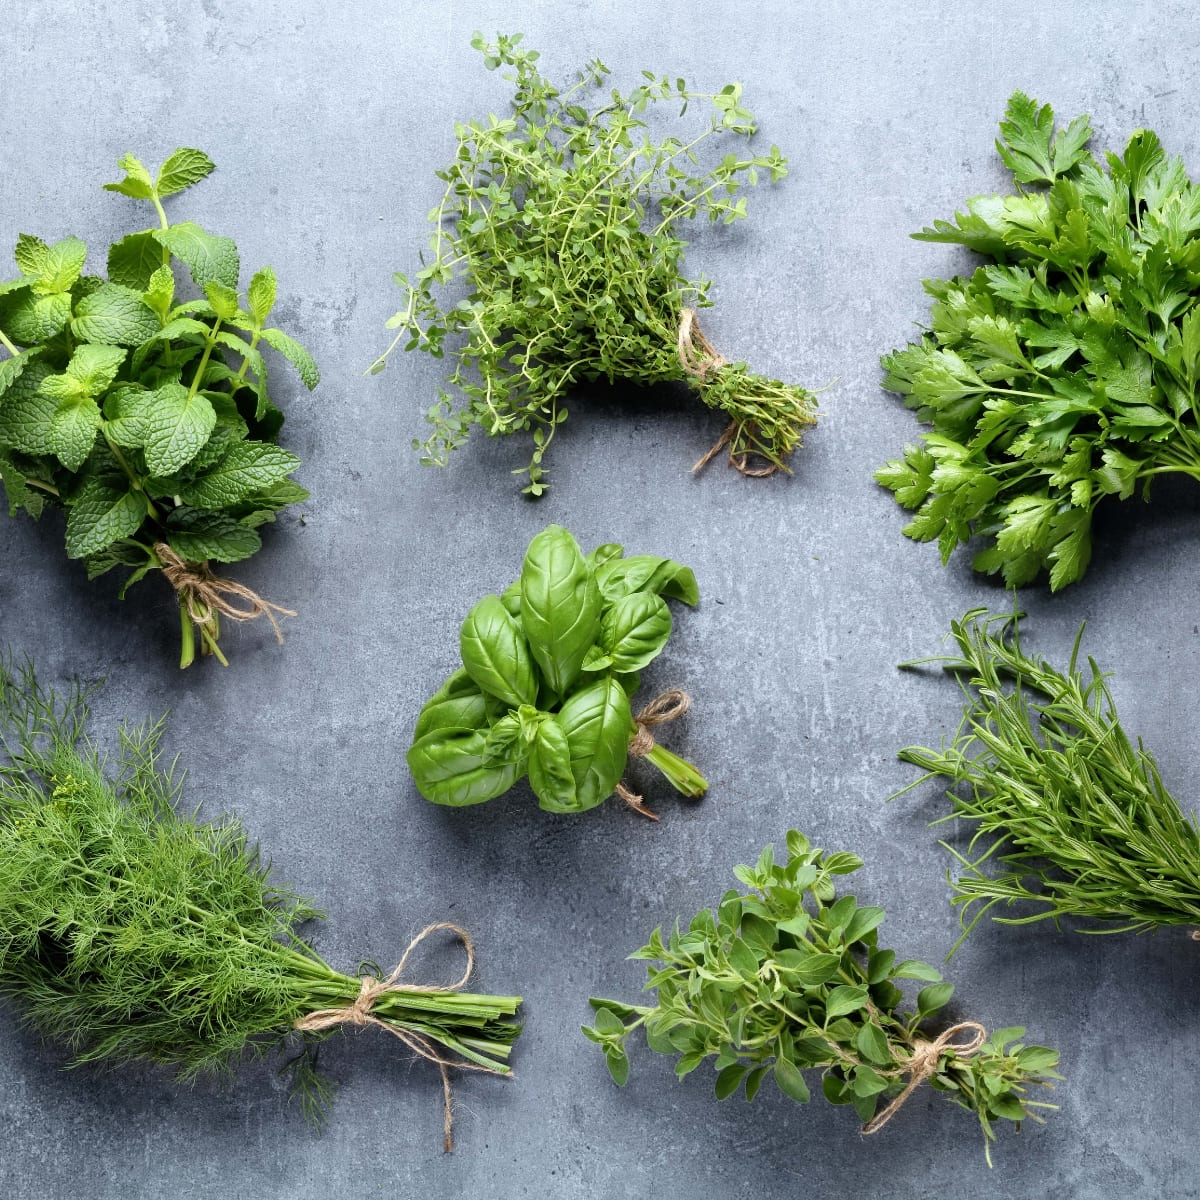 17 Types of Herbs (+ How to Use Them!) featuring Various Fresh Herbs on a Gray Background